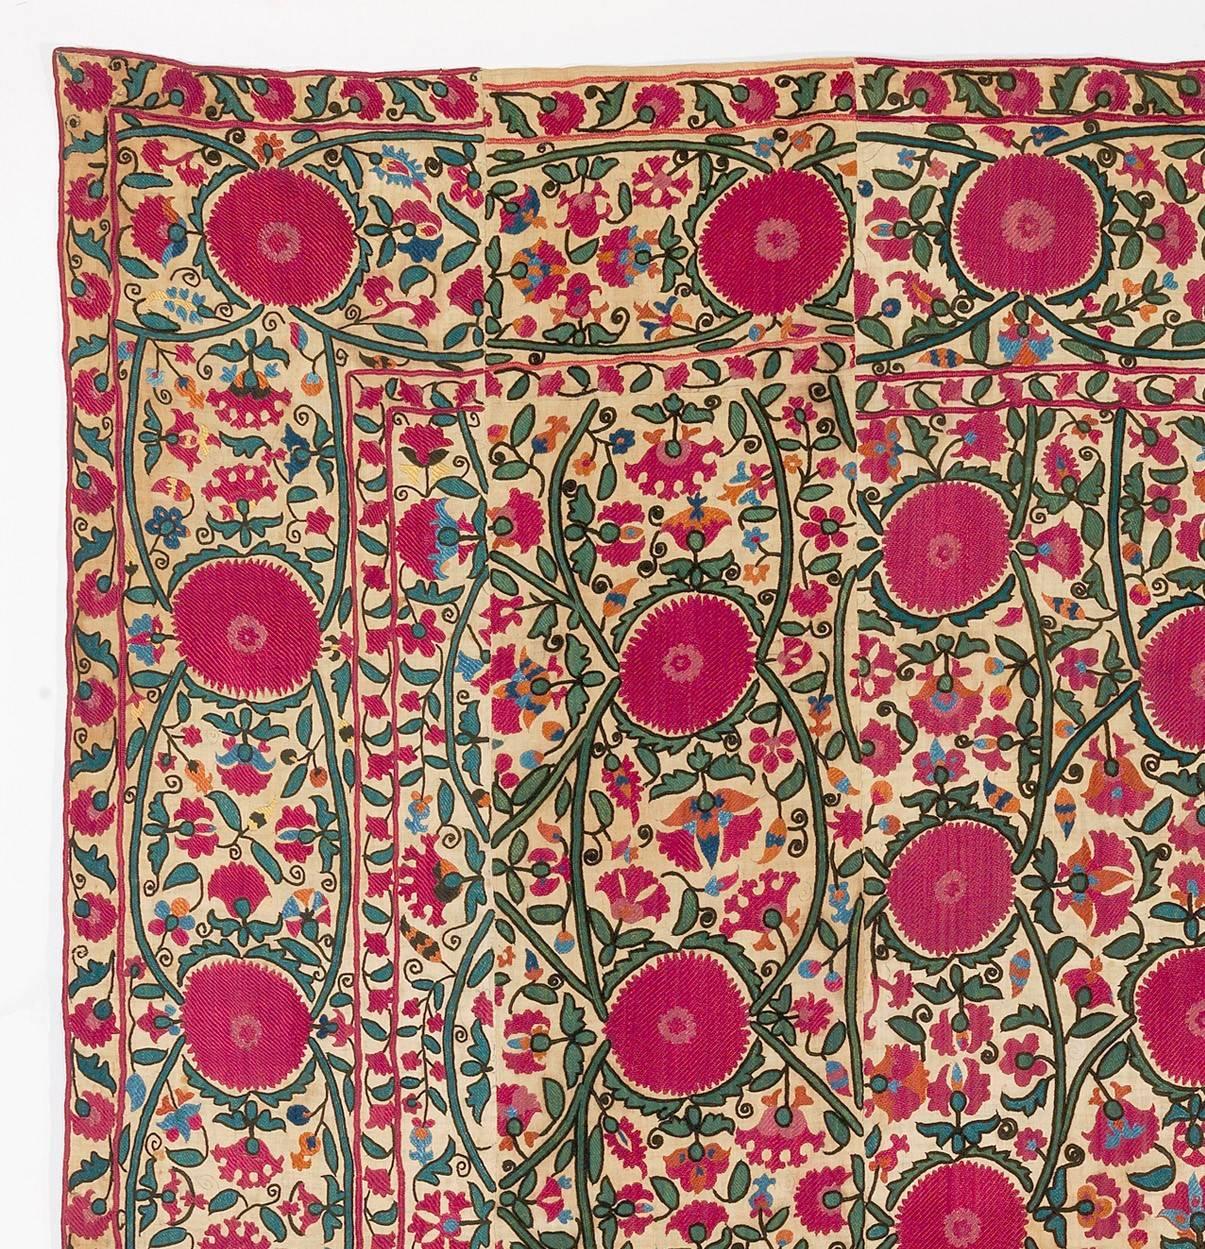 Susani, Uzbekistan, 19th century, Samarkand, wonderful silk embroidery in Basma and Tambour stitch, dowry pieces like this were made on narrow stripes of hand woven cotton which were embroidered separately and later joined, especially interesting in